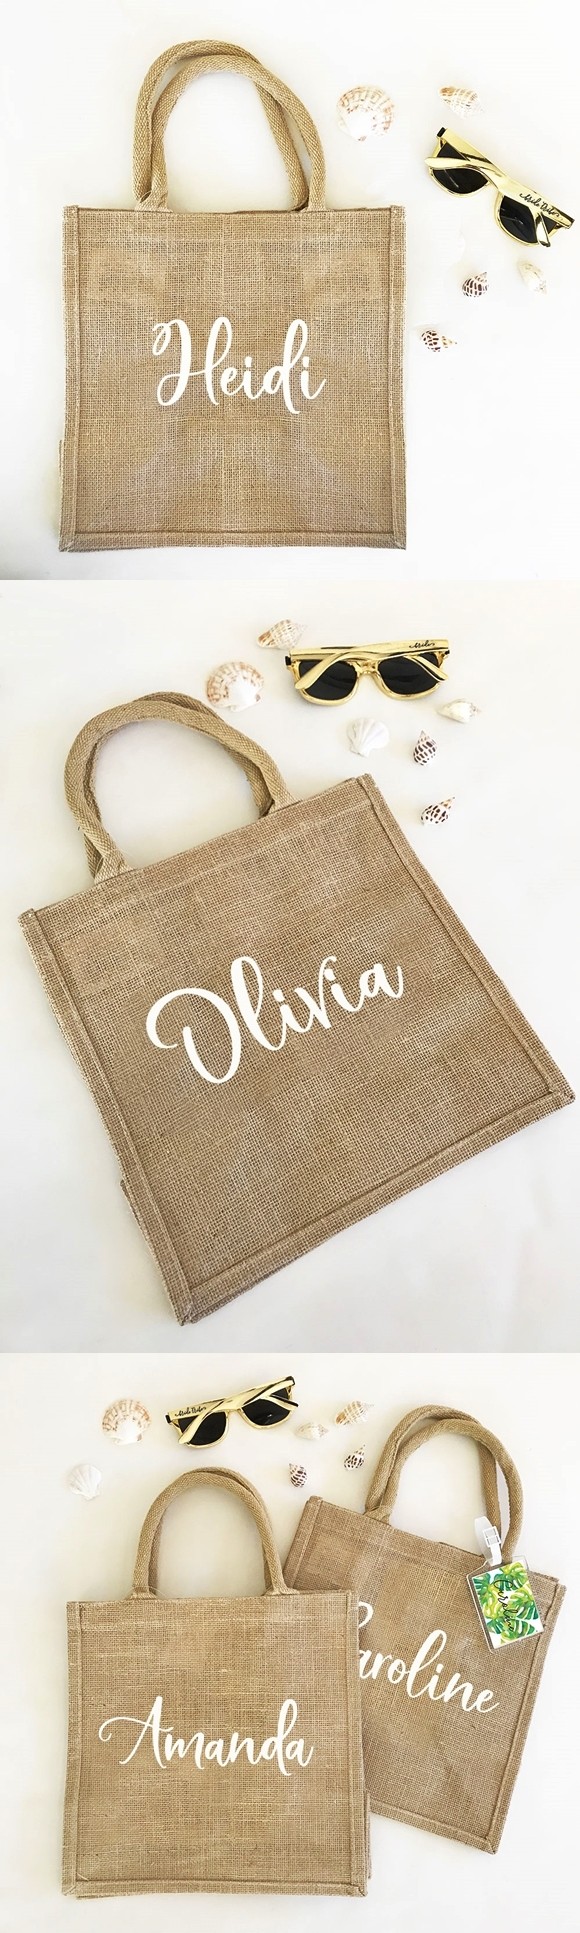 Personalized Burlap Tote Bag with Contemporary Script Name in White ...